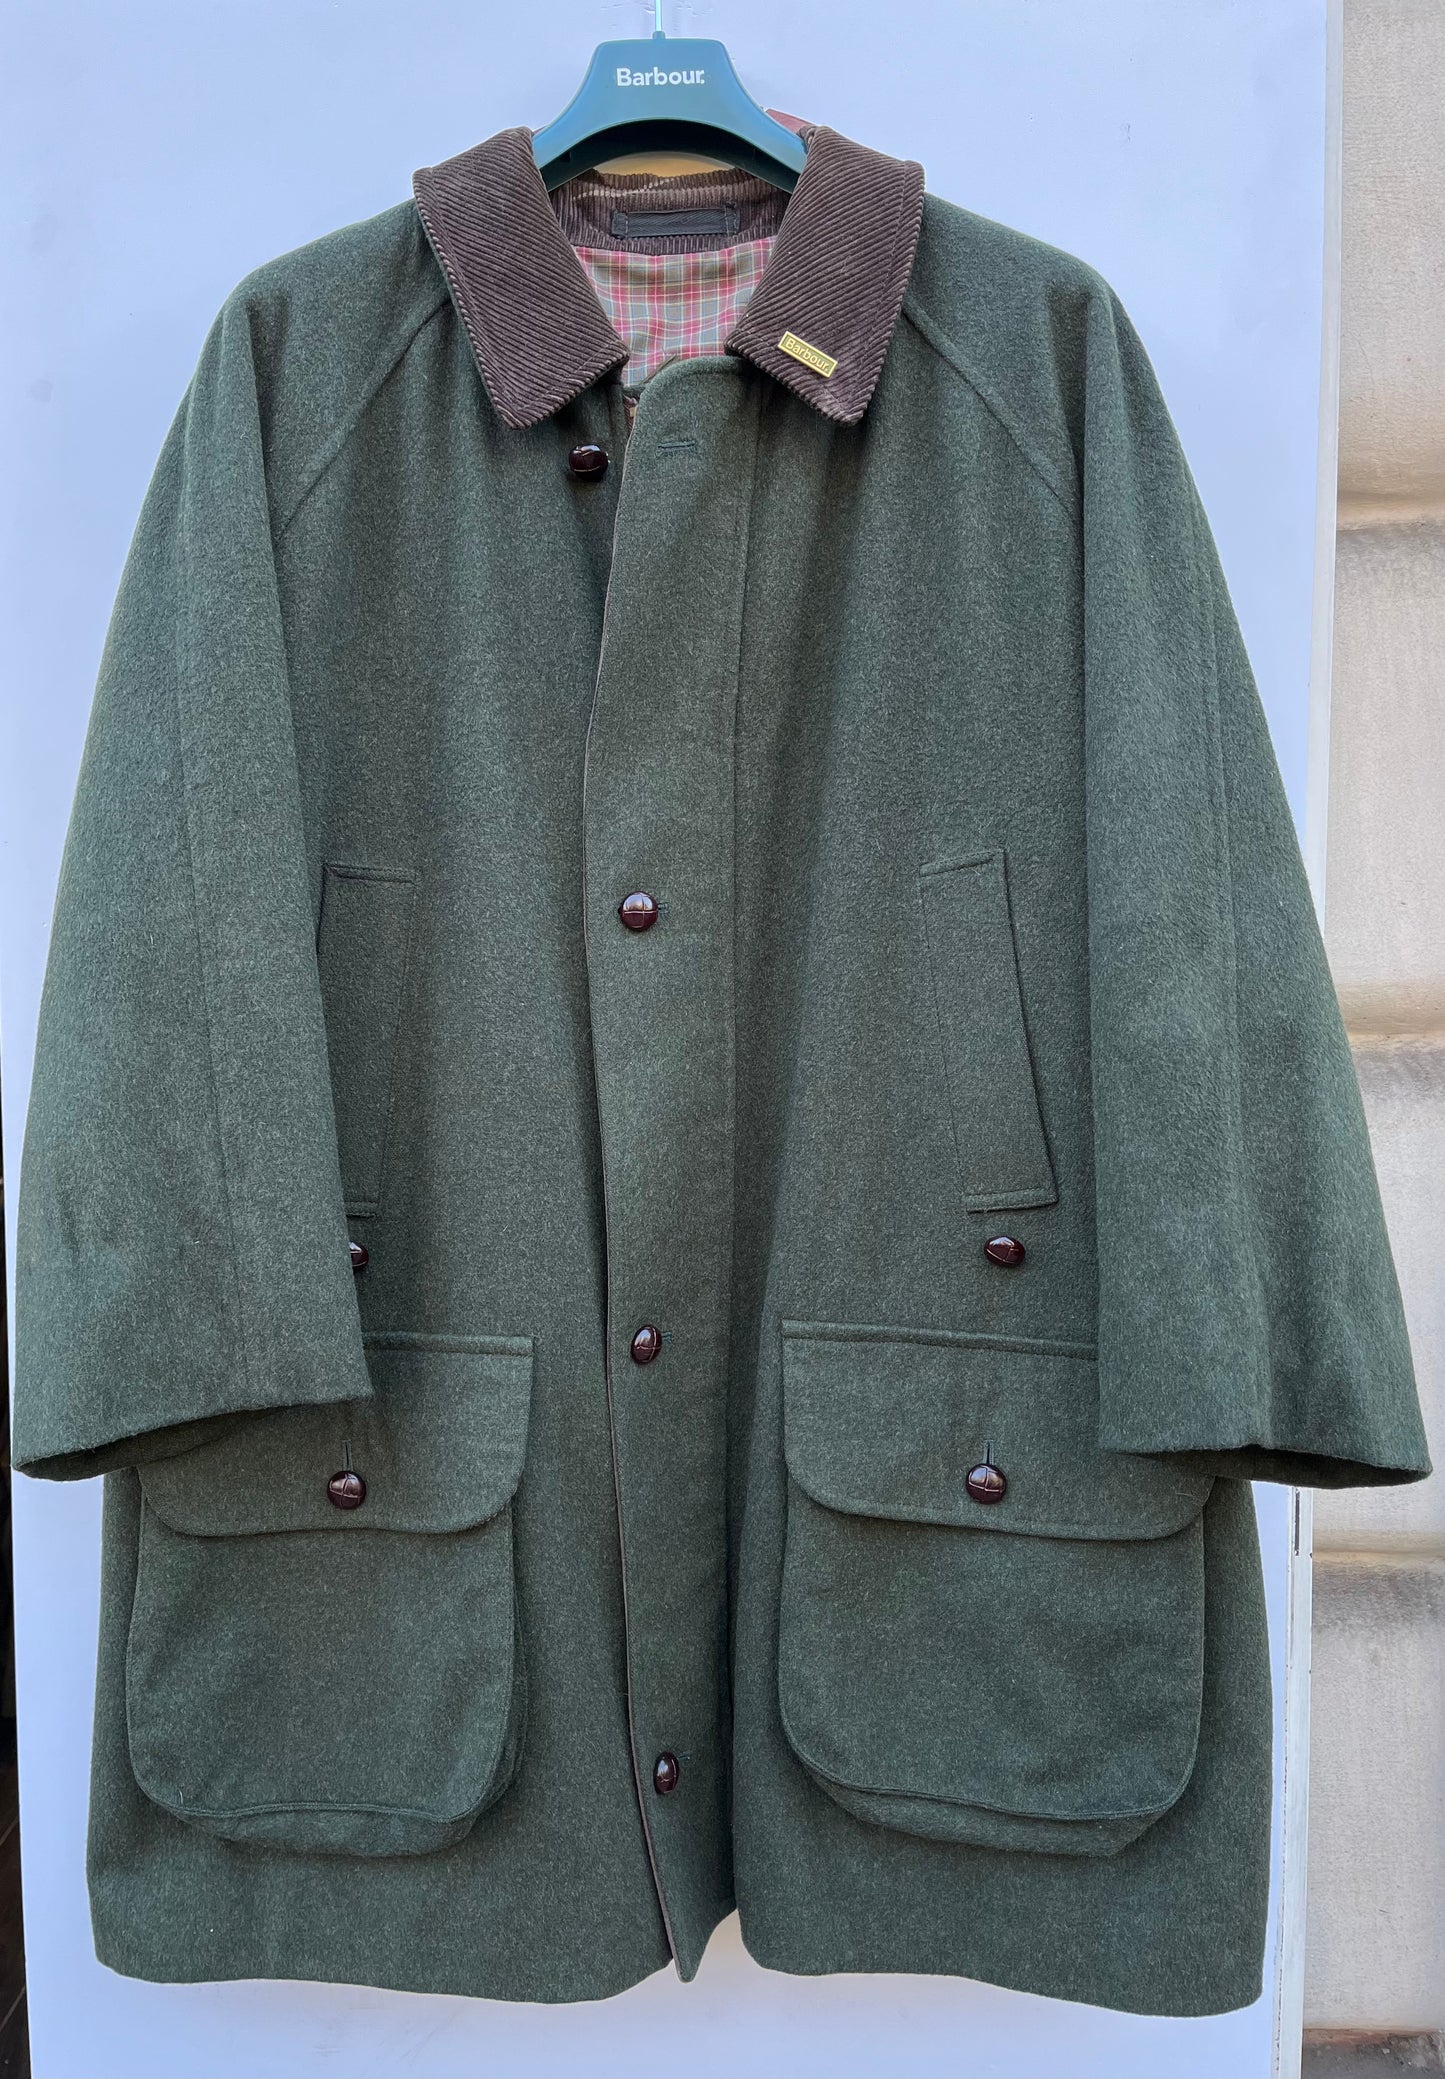 RARO Barbour Cappotto Loden in Lana verde c46 Rare wool Loden vintage coat size XL